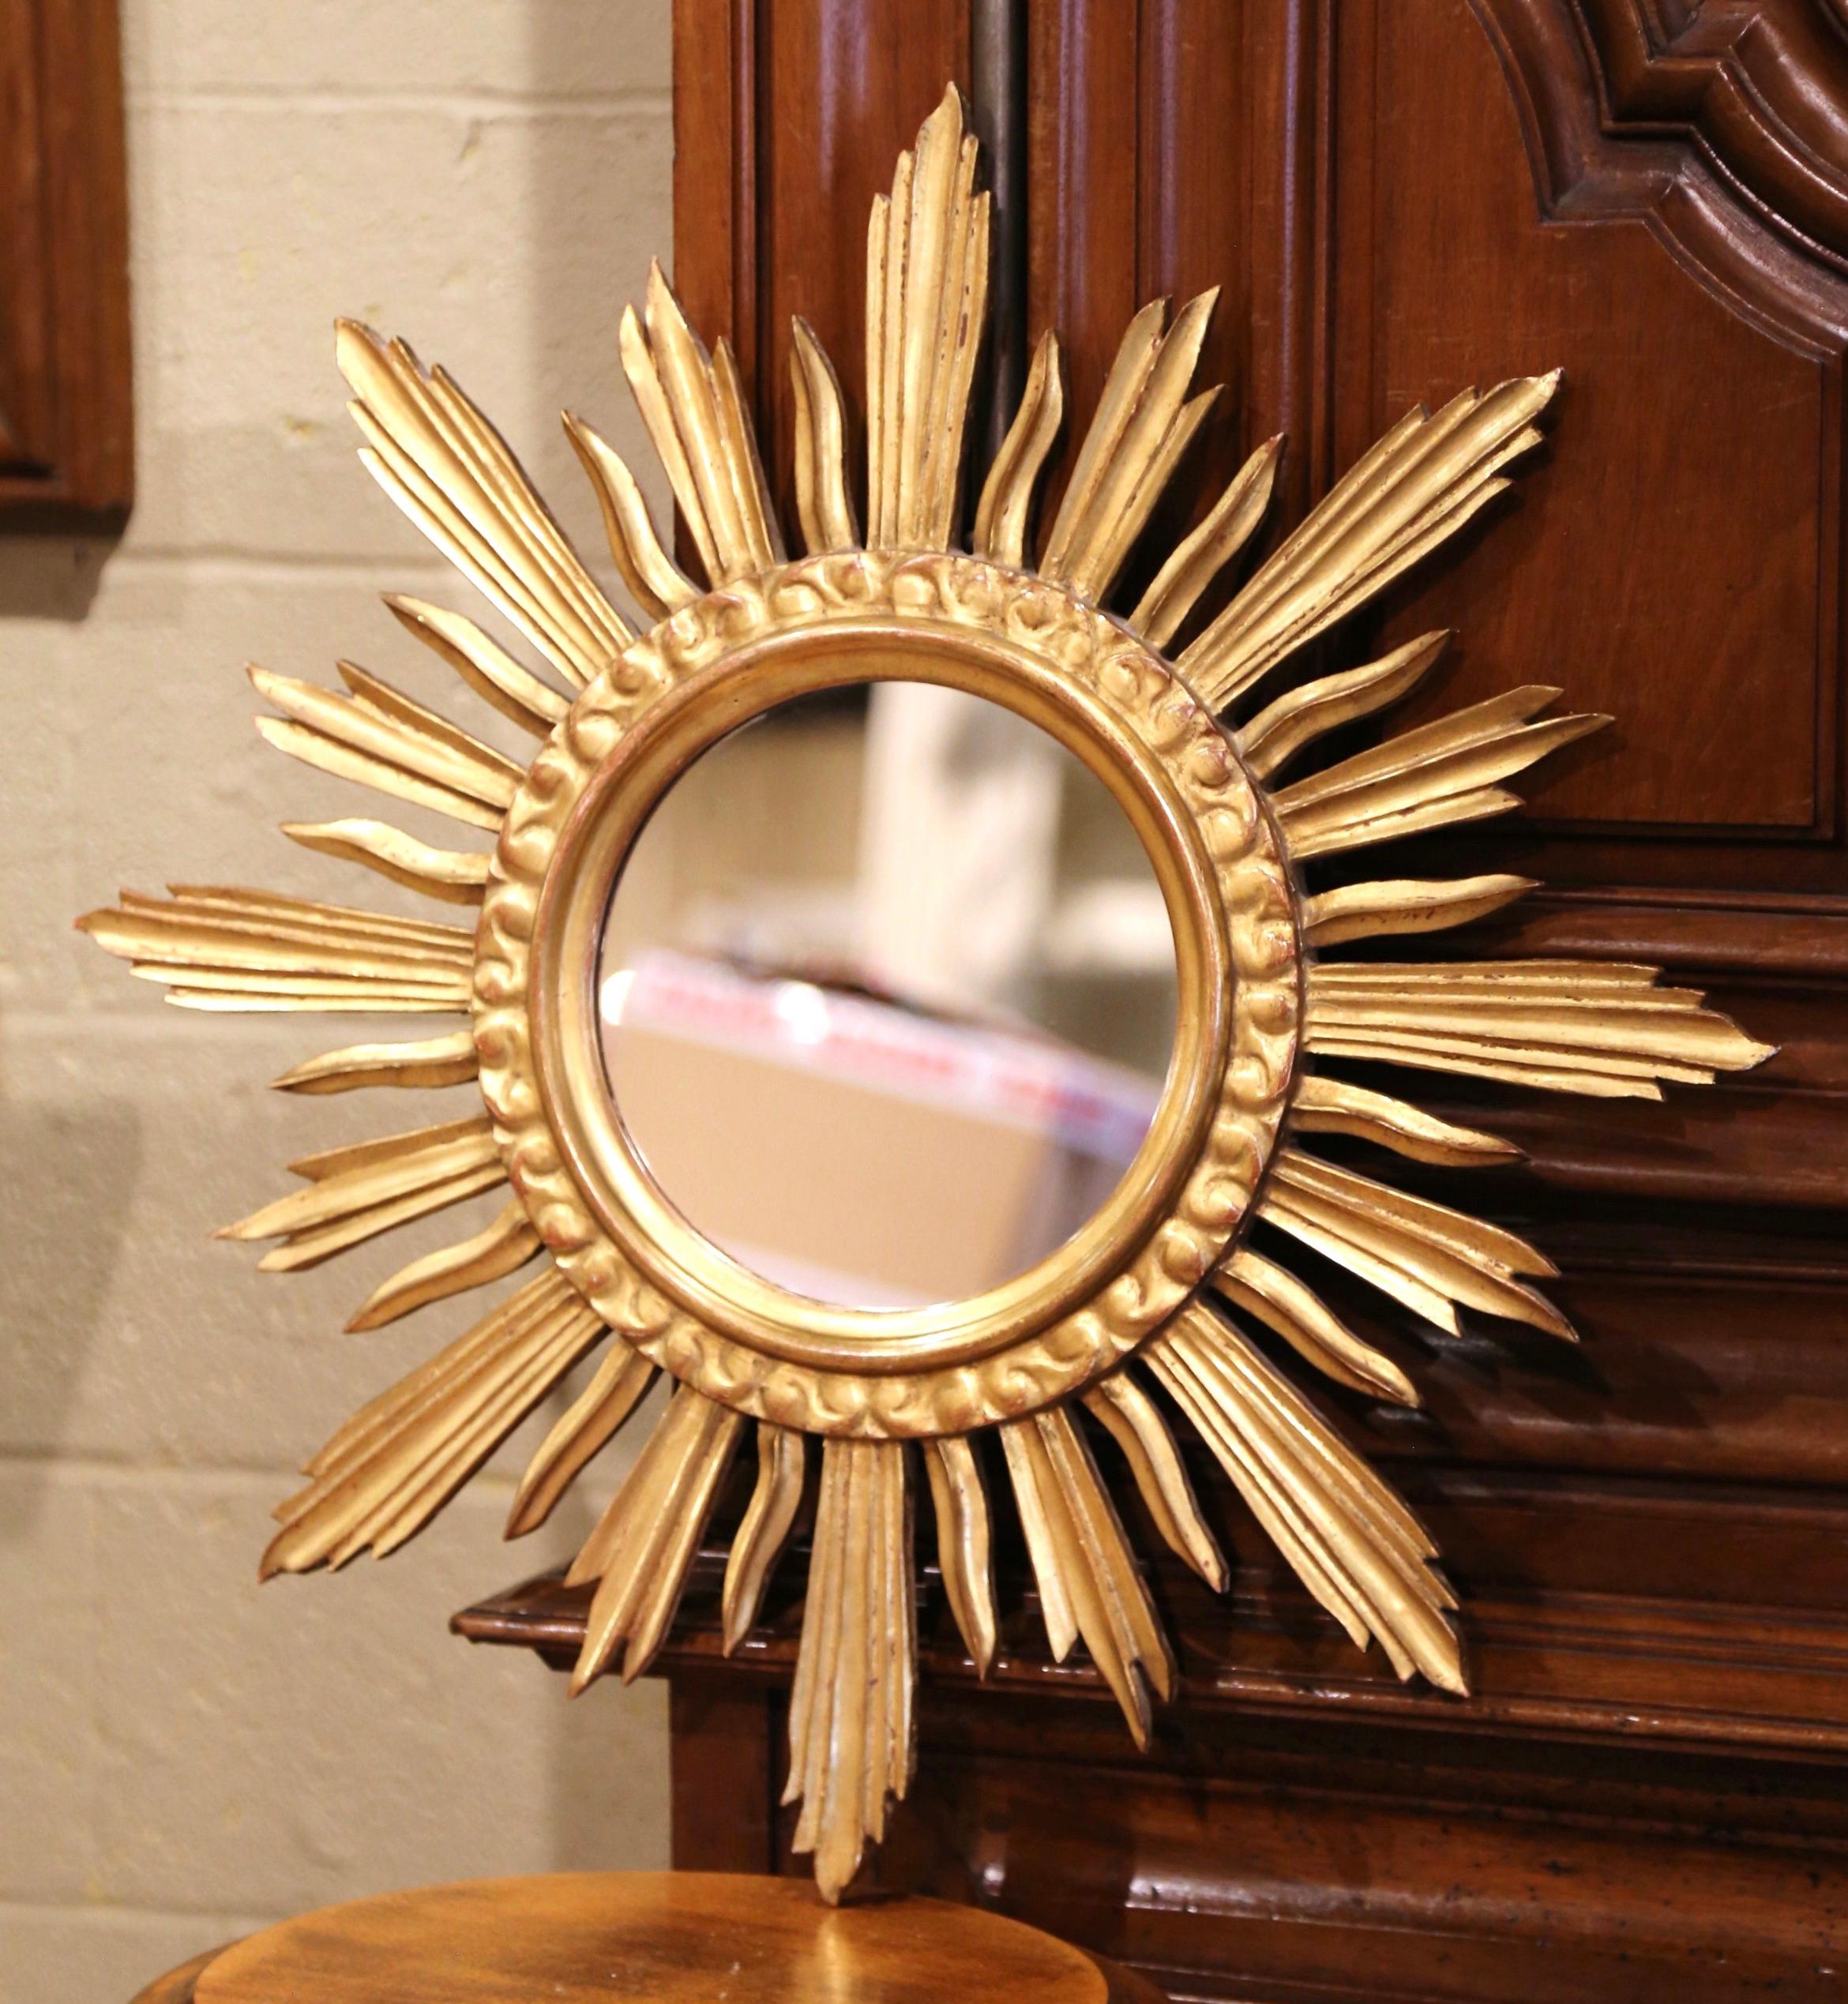 Add a beautiful shine to your home with this eye-catching and elegant sunburst mirror from Versailles, France. Created circa 1970, the giltwood wall decor has a classic sunbeam shape, a round convex glass in the center, and a rich rubbed gold leaf